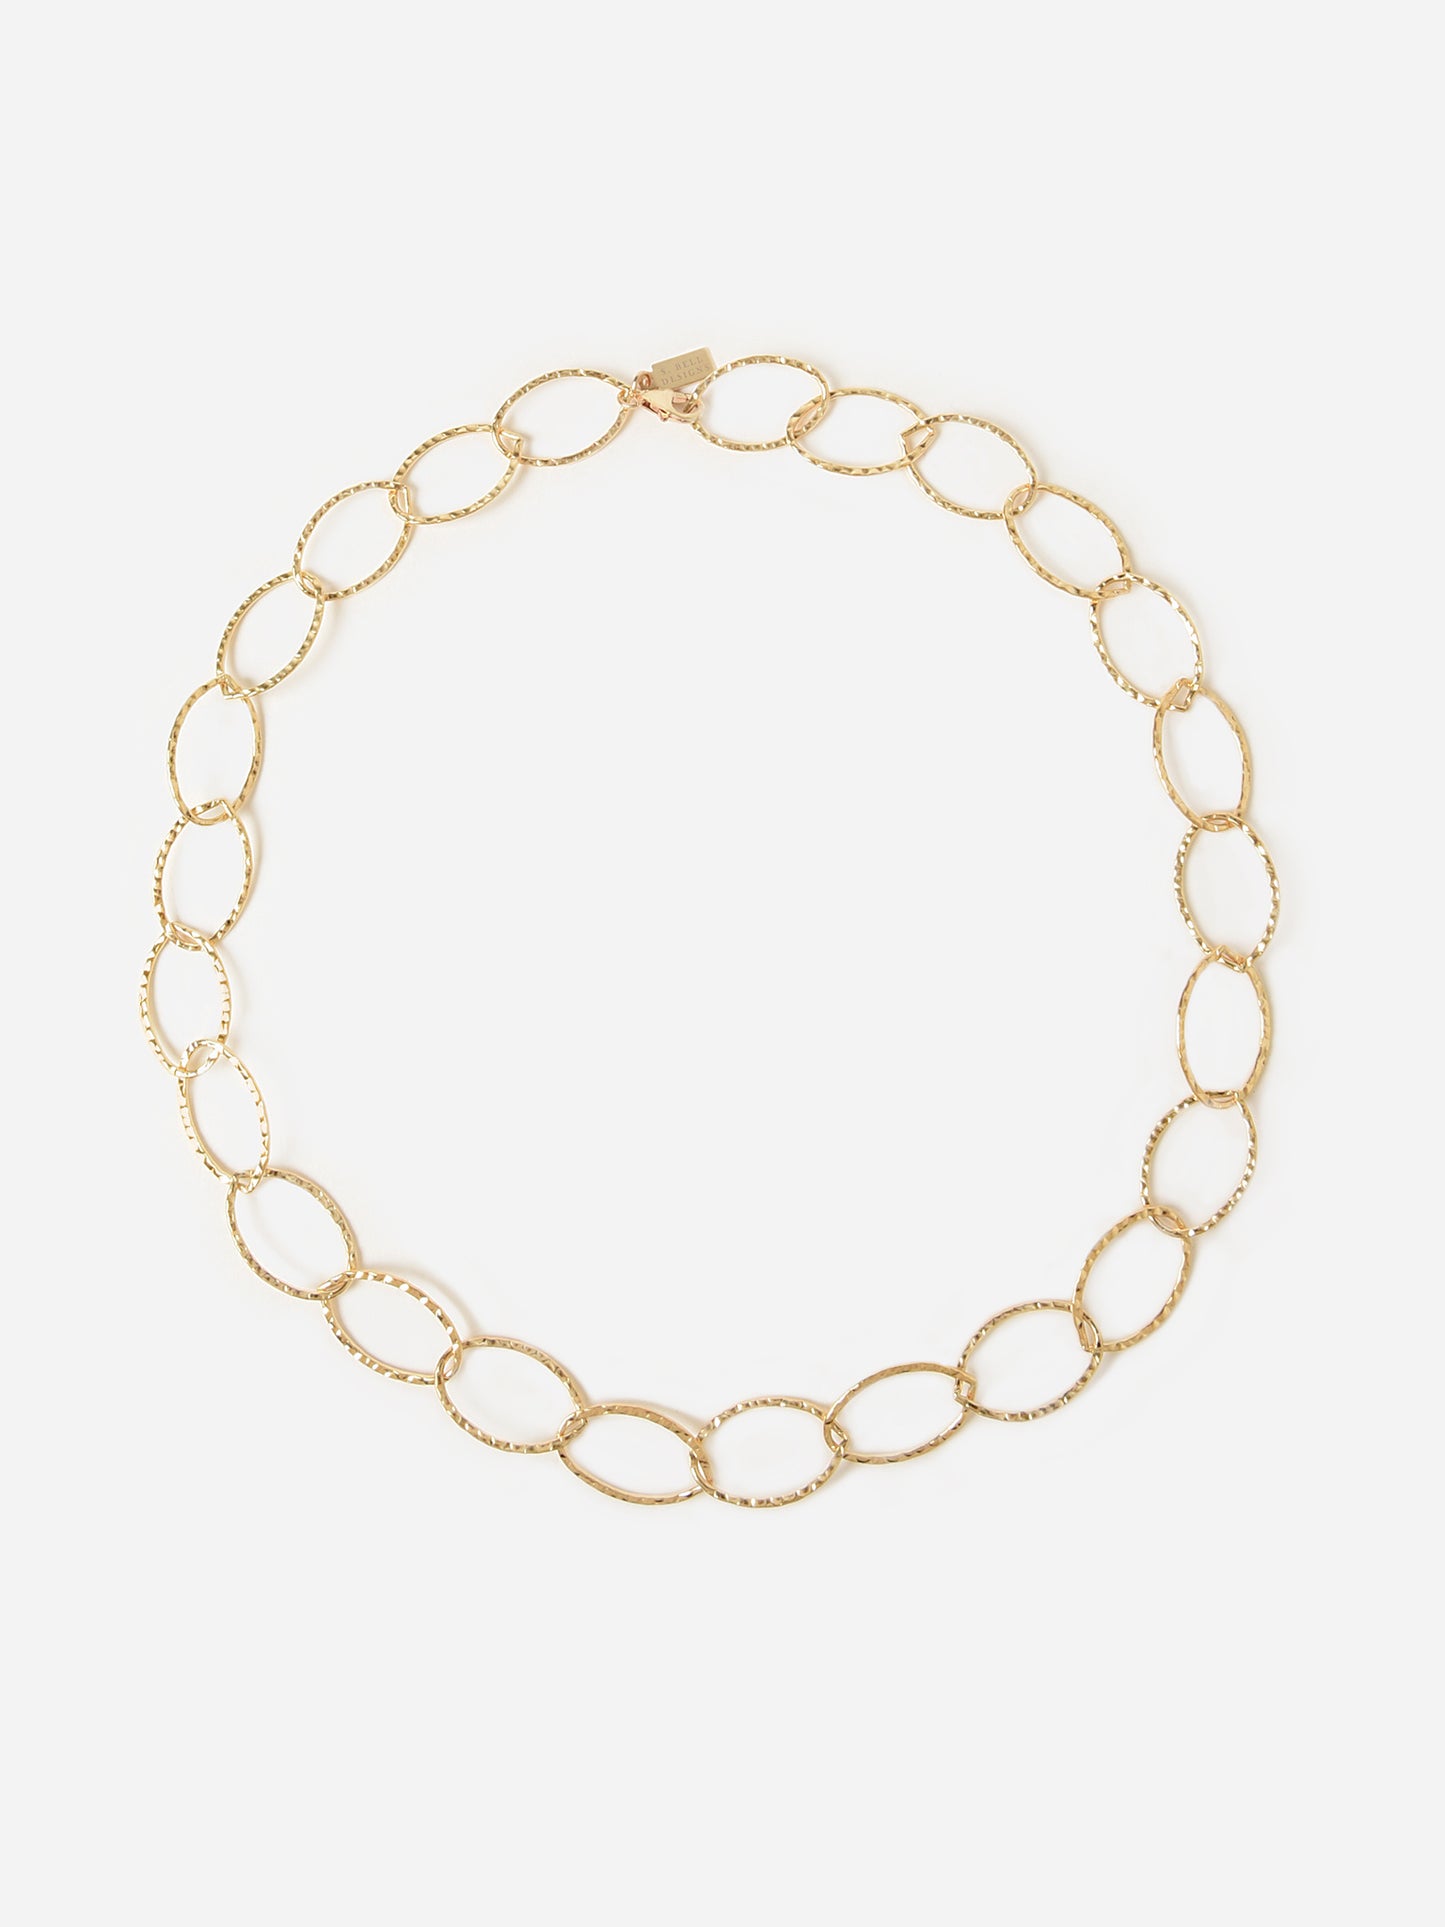 S. Bell Women's Classic Chain Necklace